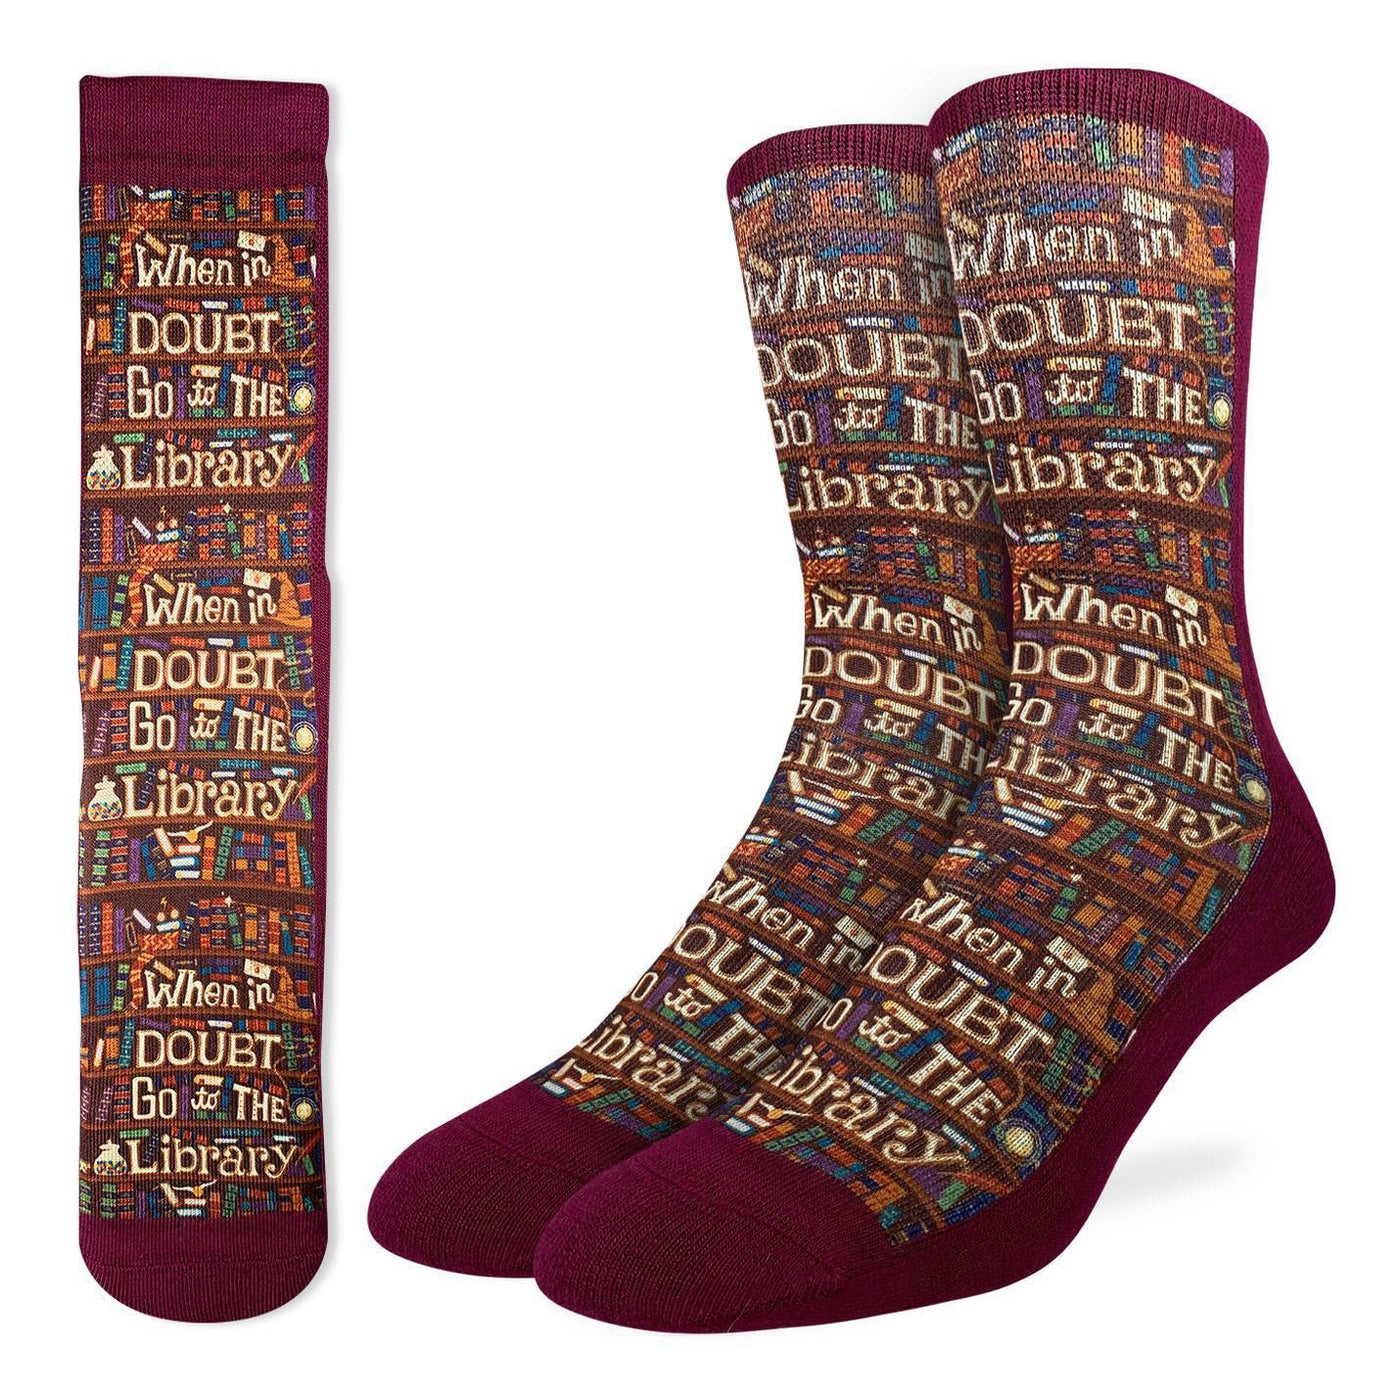 "Go to the Library" Crew Socks by Good Luck Sock